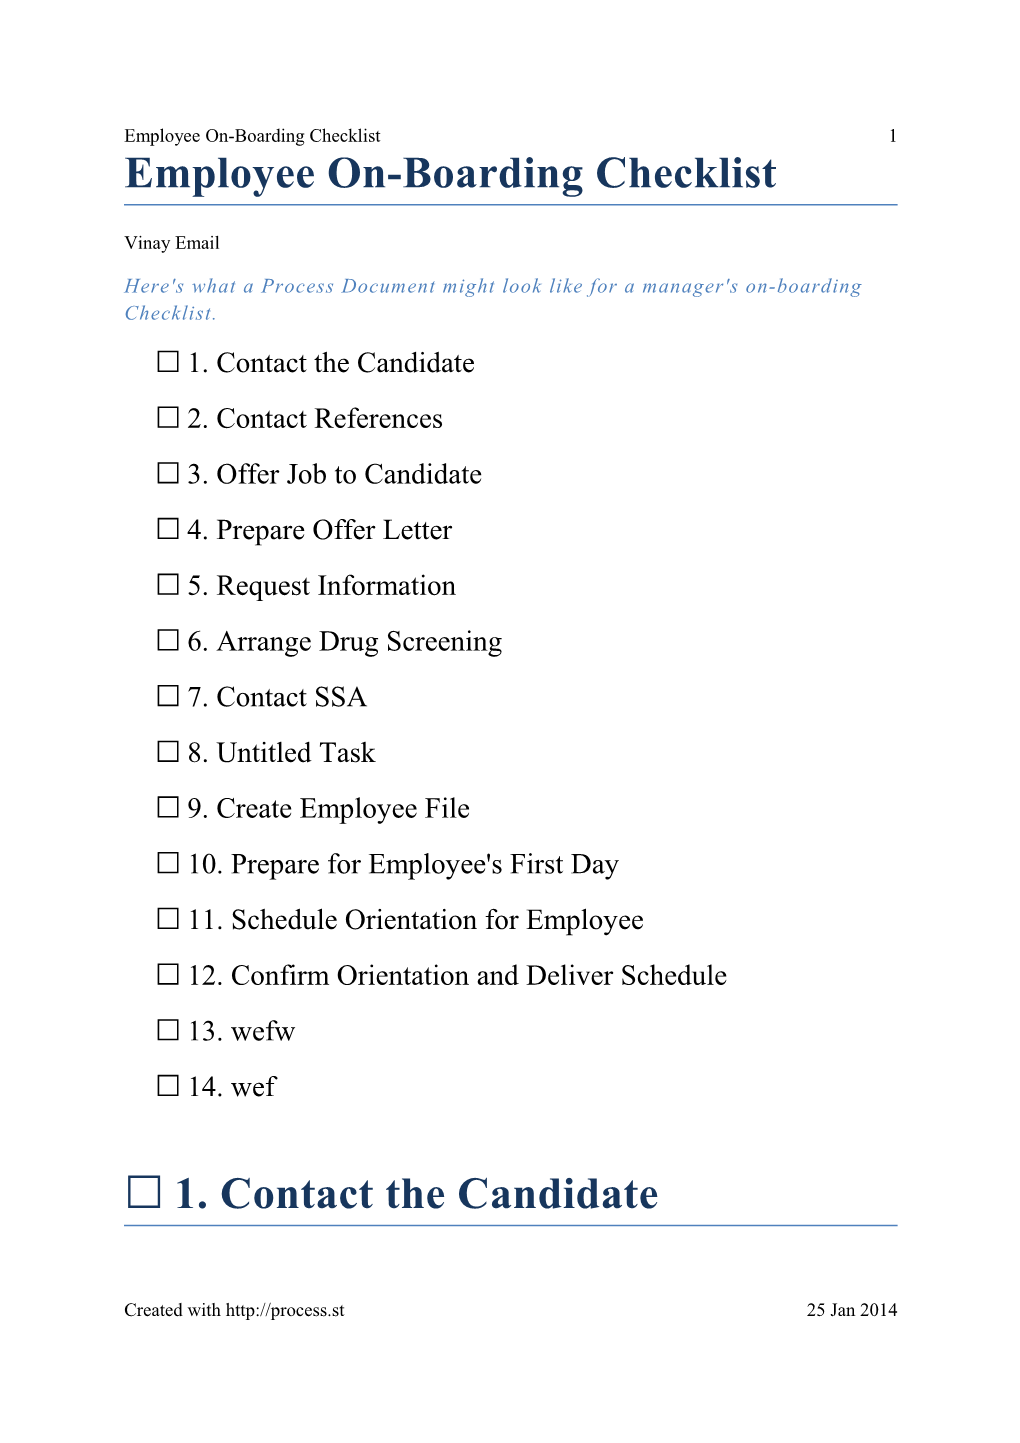 Here's What a Process Document Might Look Like for a Manager's On-Boarding Checklist